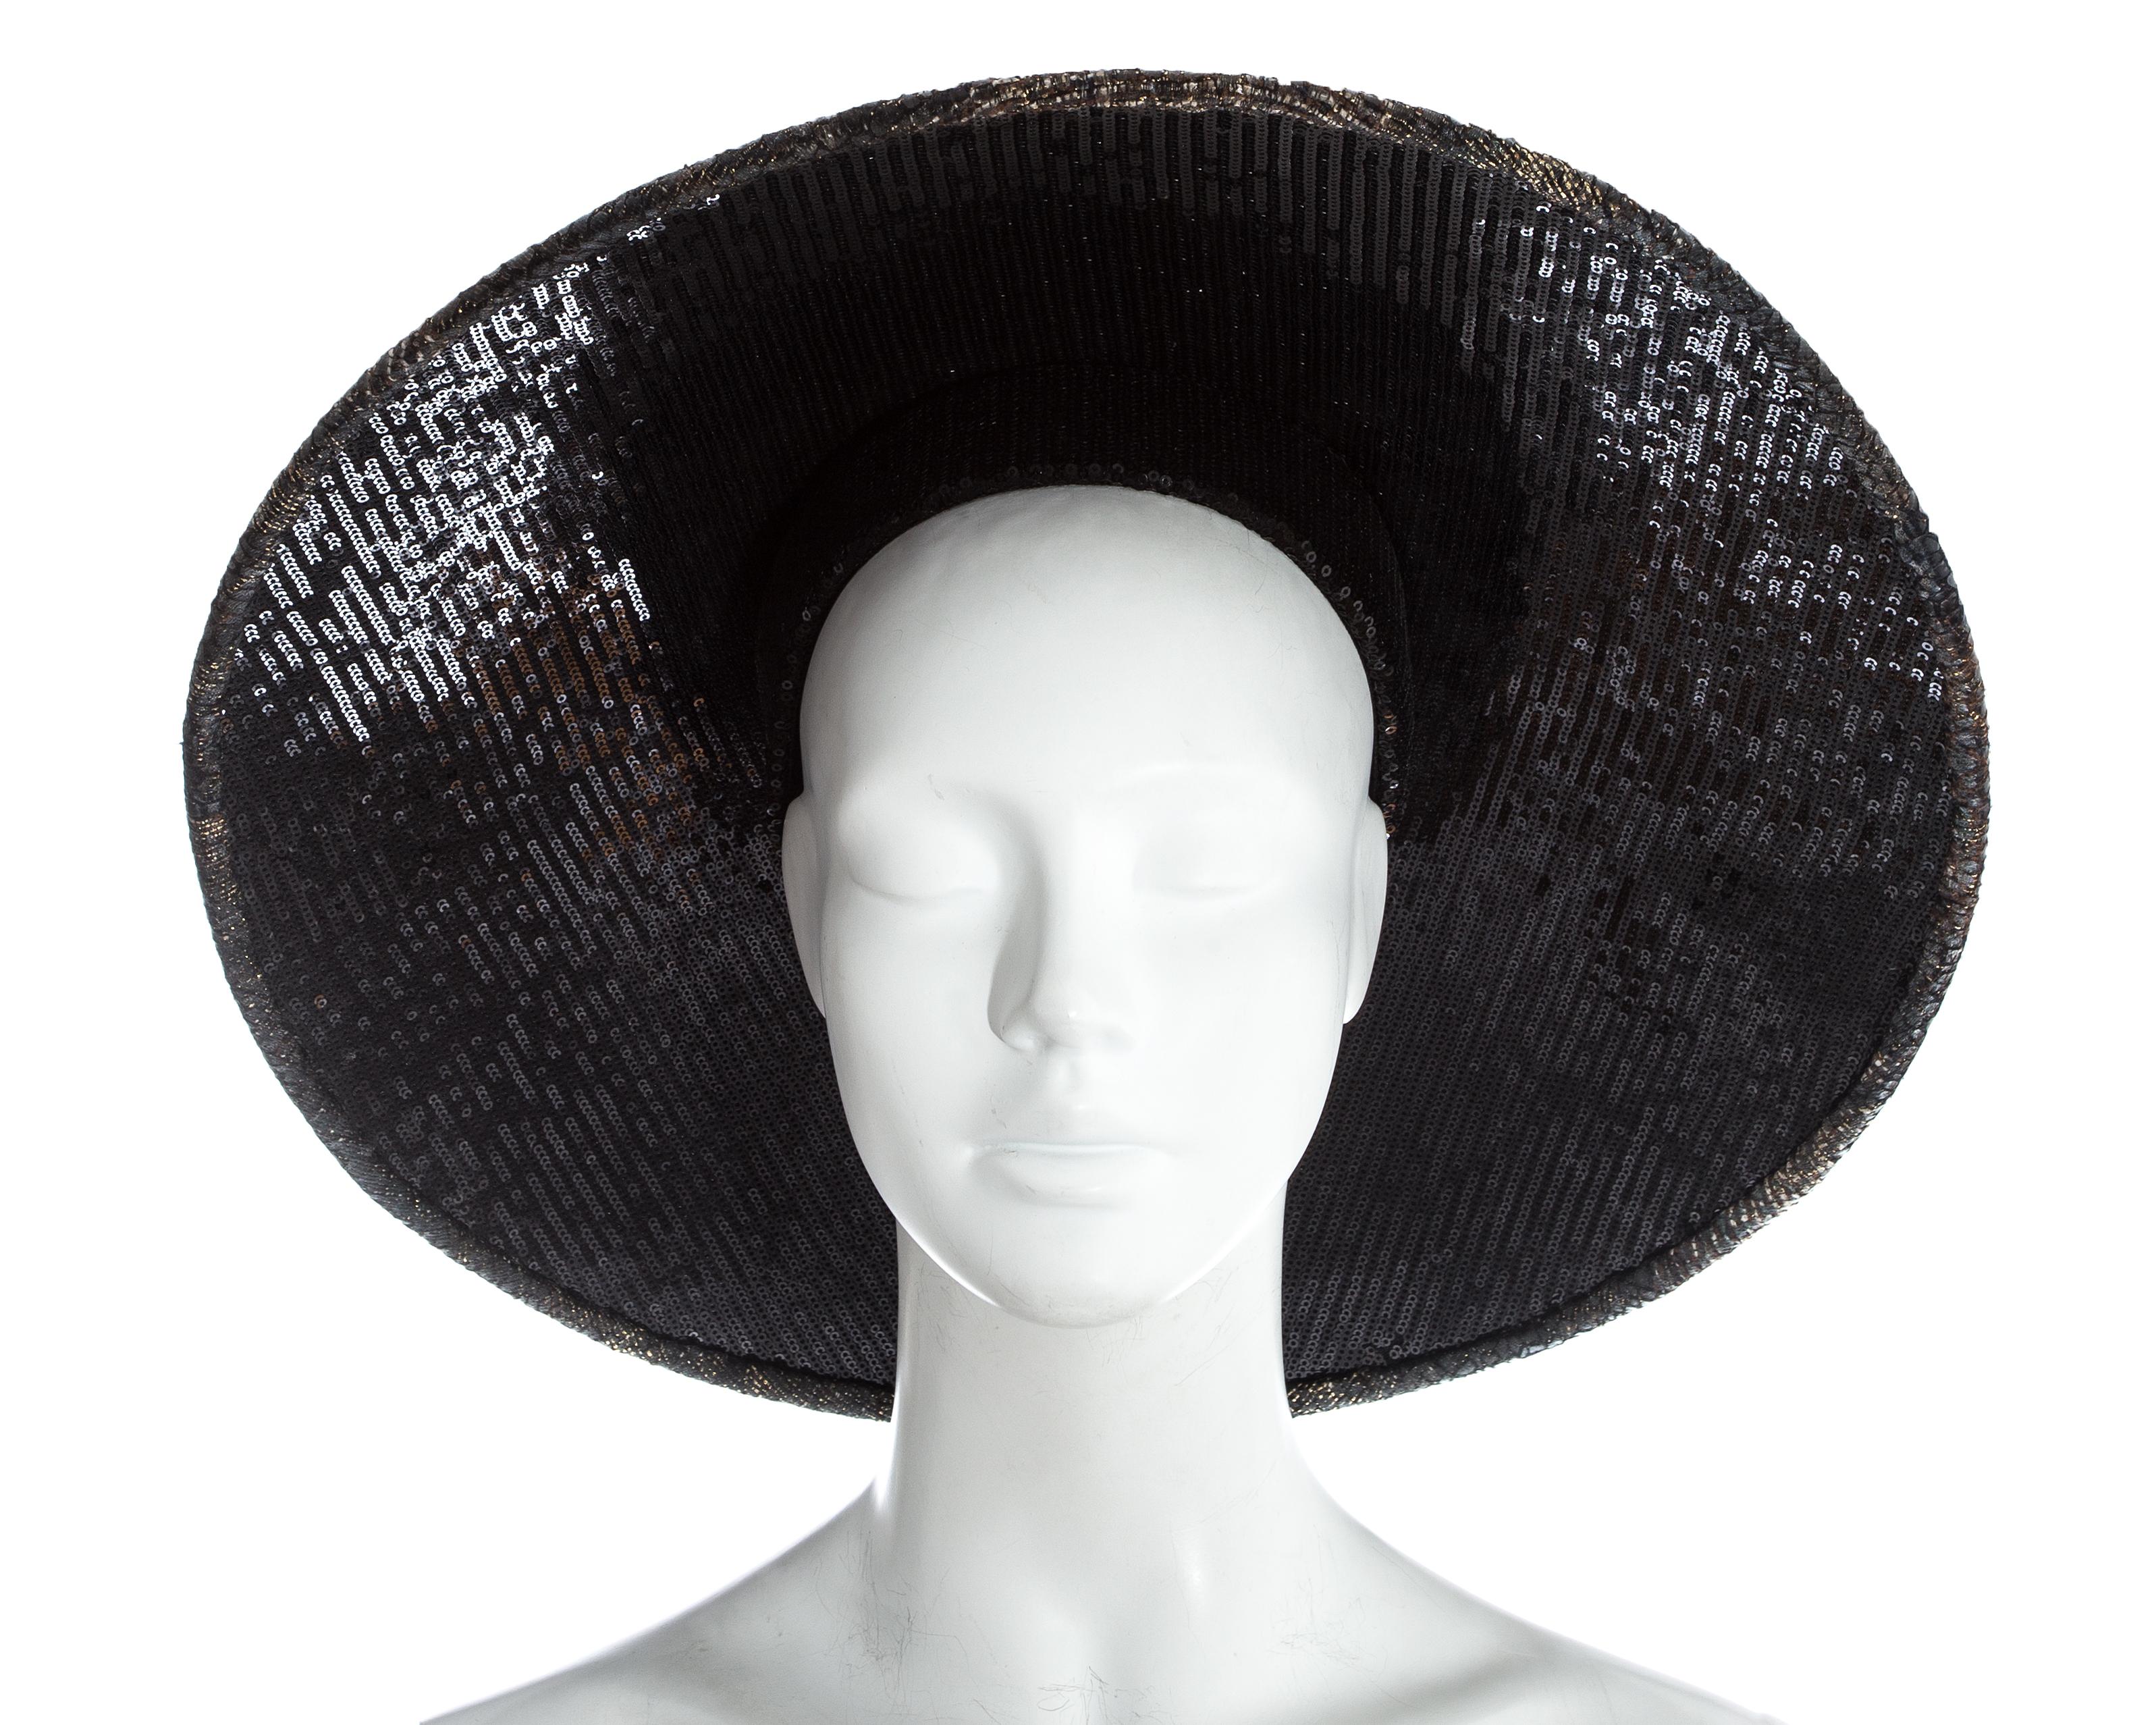 Chanel by Karl Lagerfeld, 'Paris-Shangai' bronze sequin conical hat, pf 2010 For Sale 2